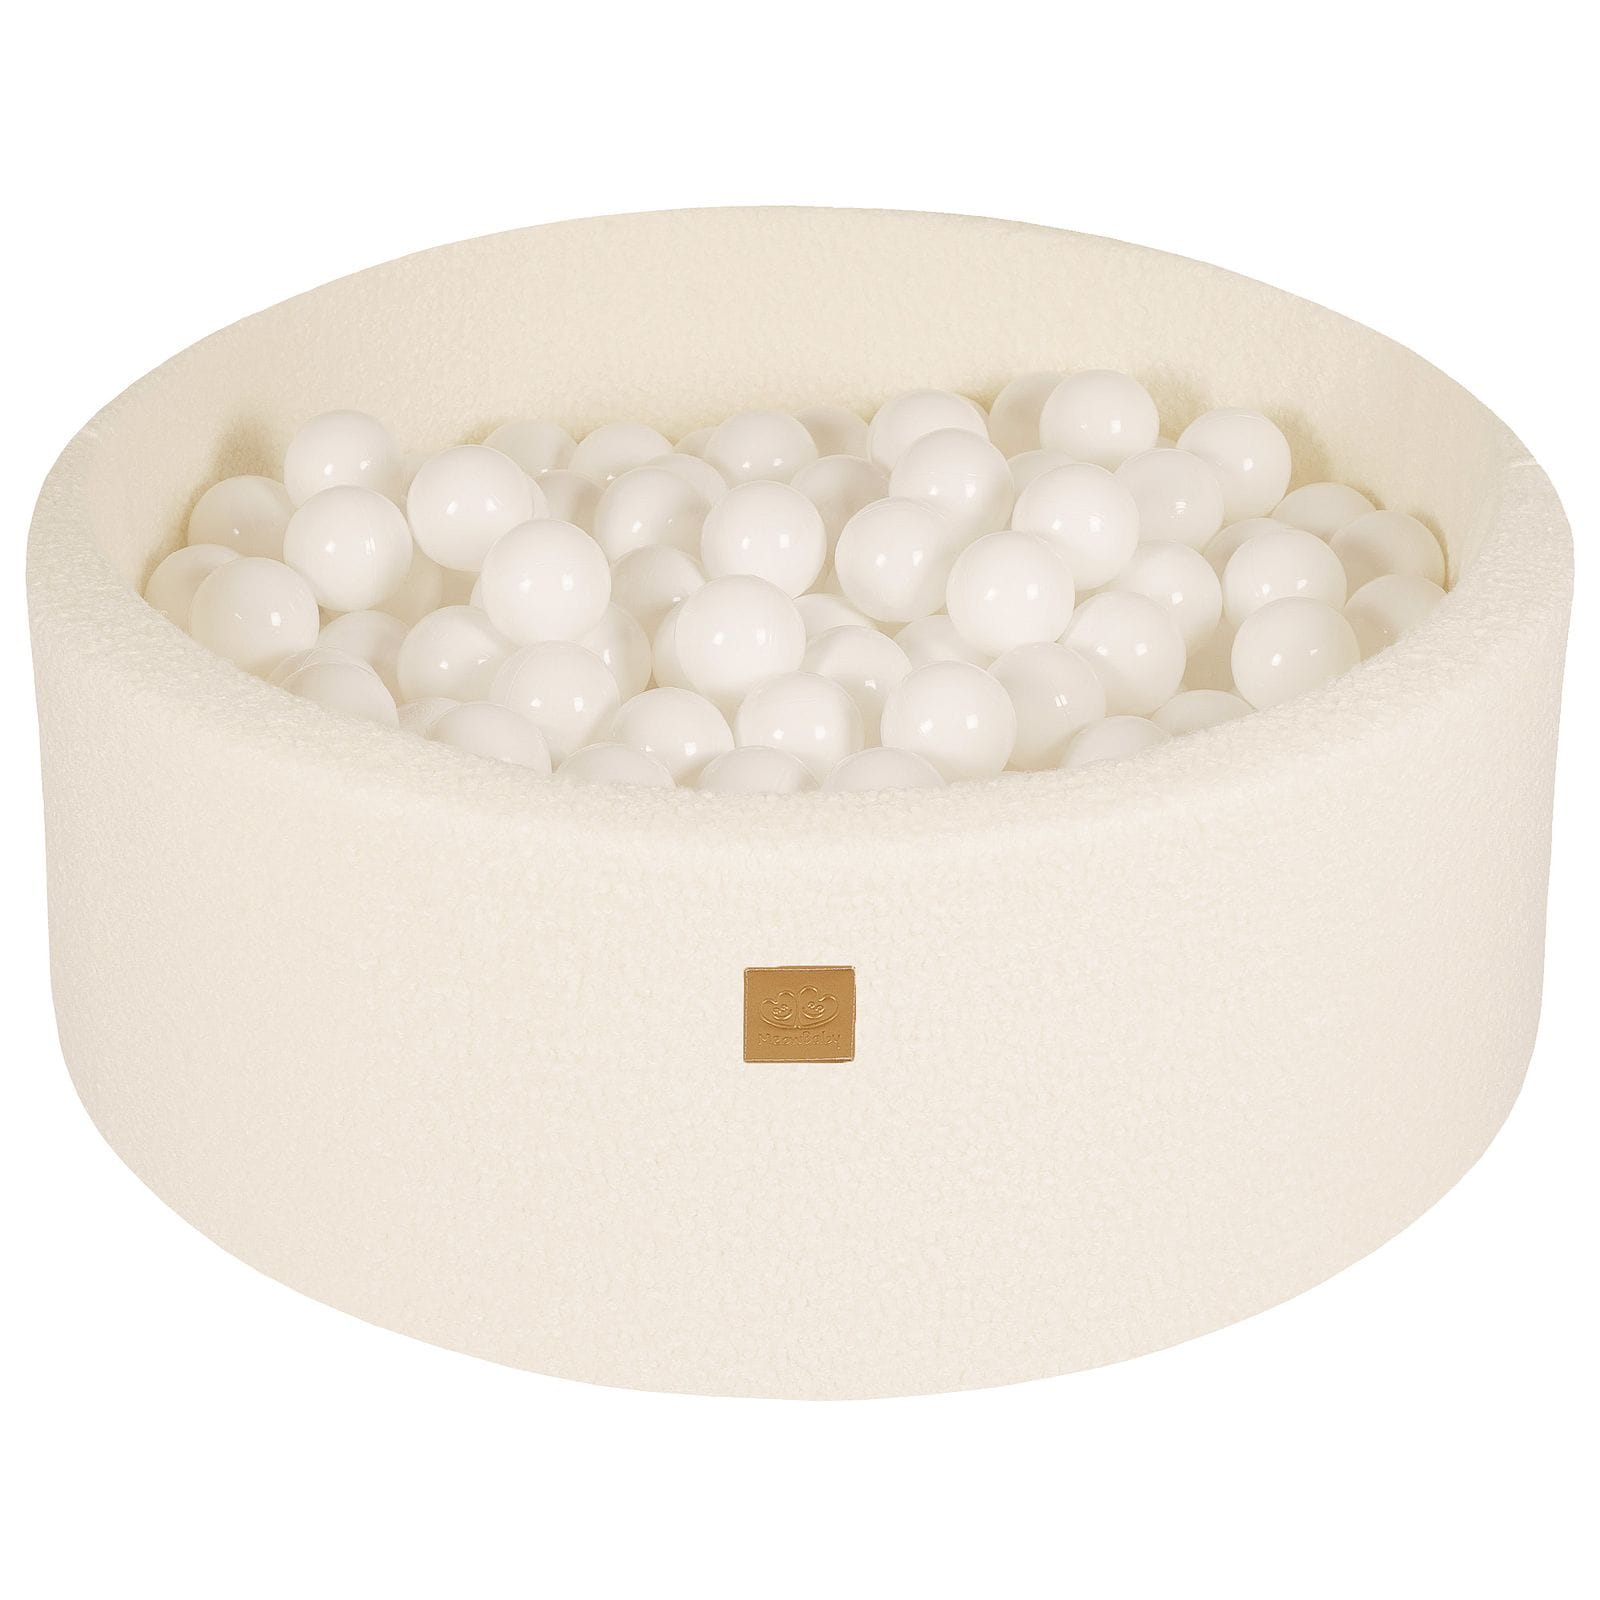 MEOW BABY Ball Pit with 200 Balls 2.75in Included for Toddlers - Baby Soft Foam Round Playpen, Boucle, White